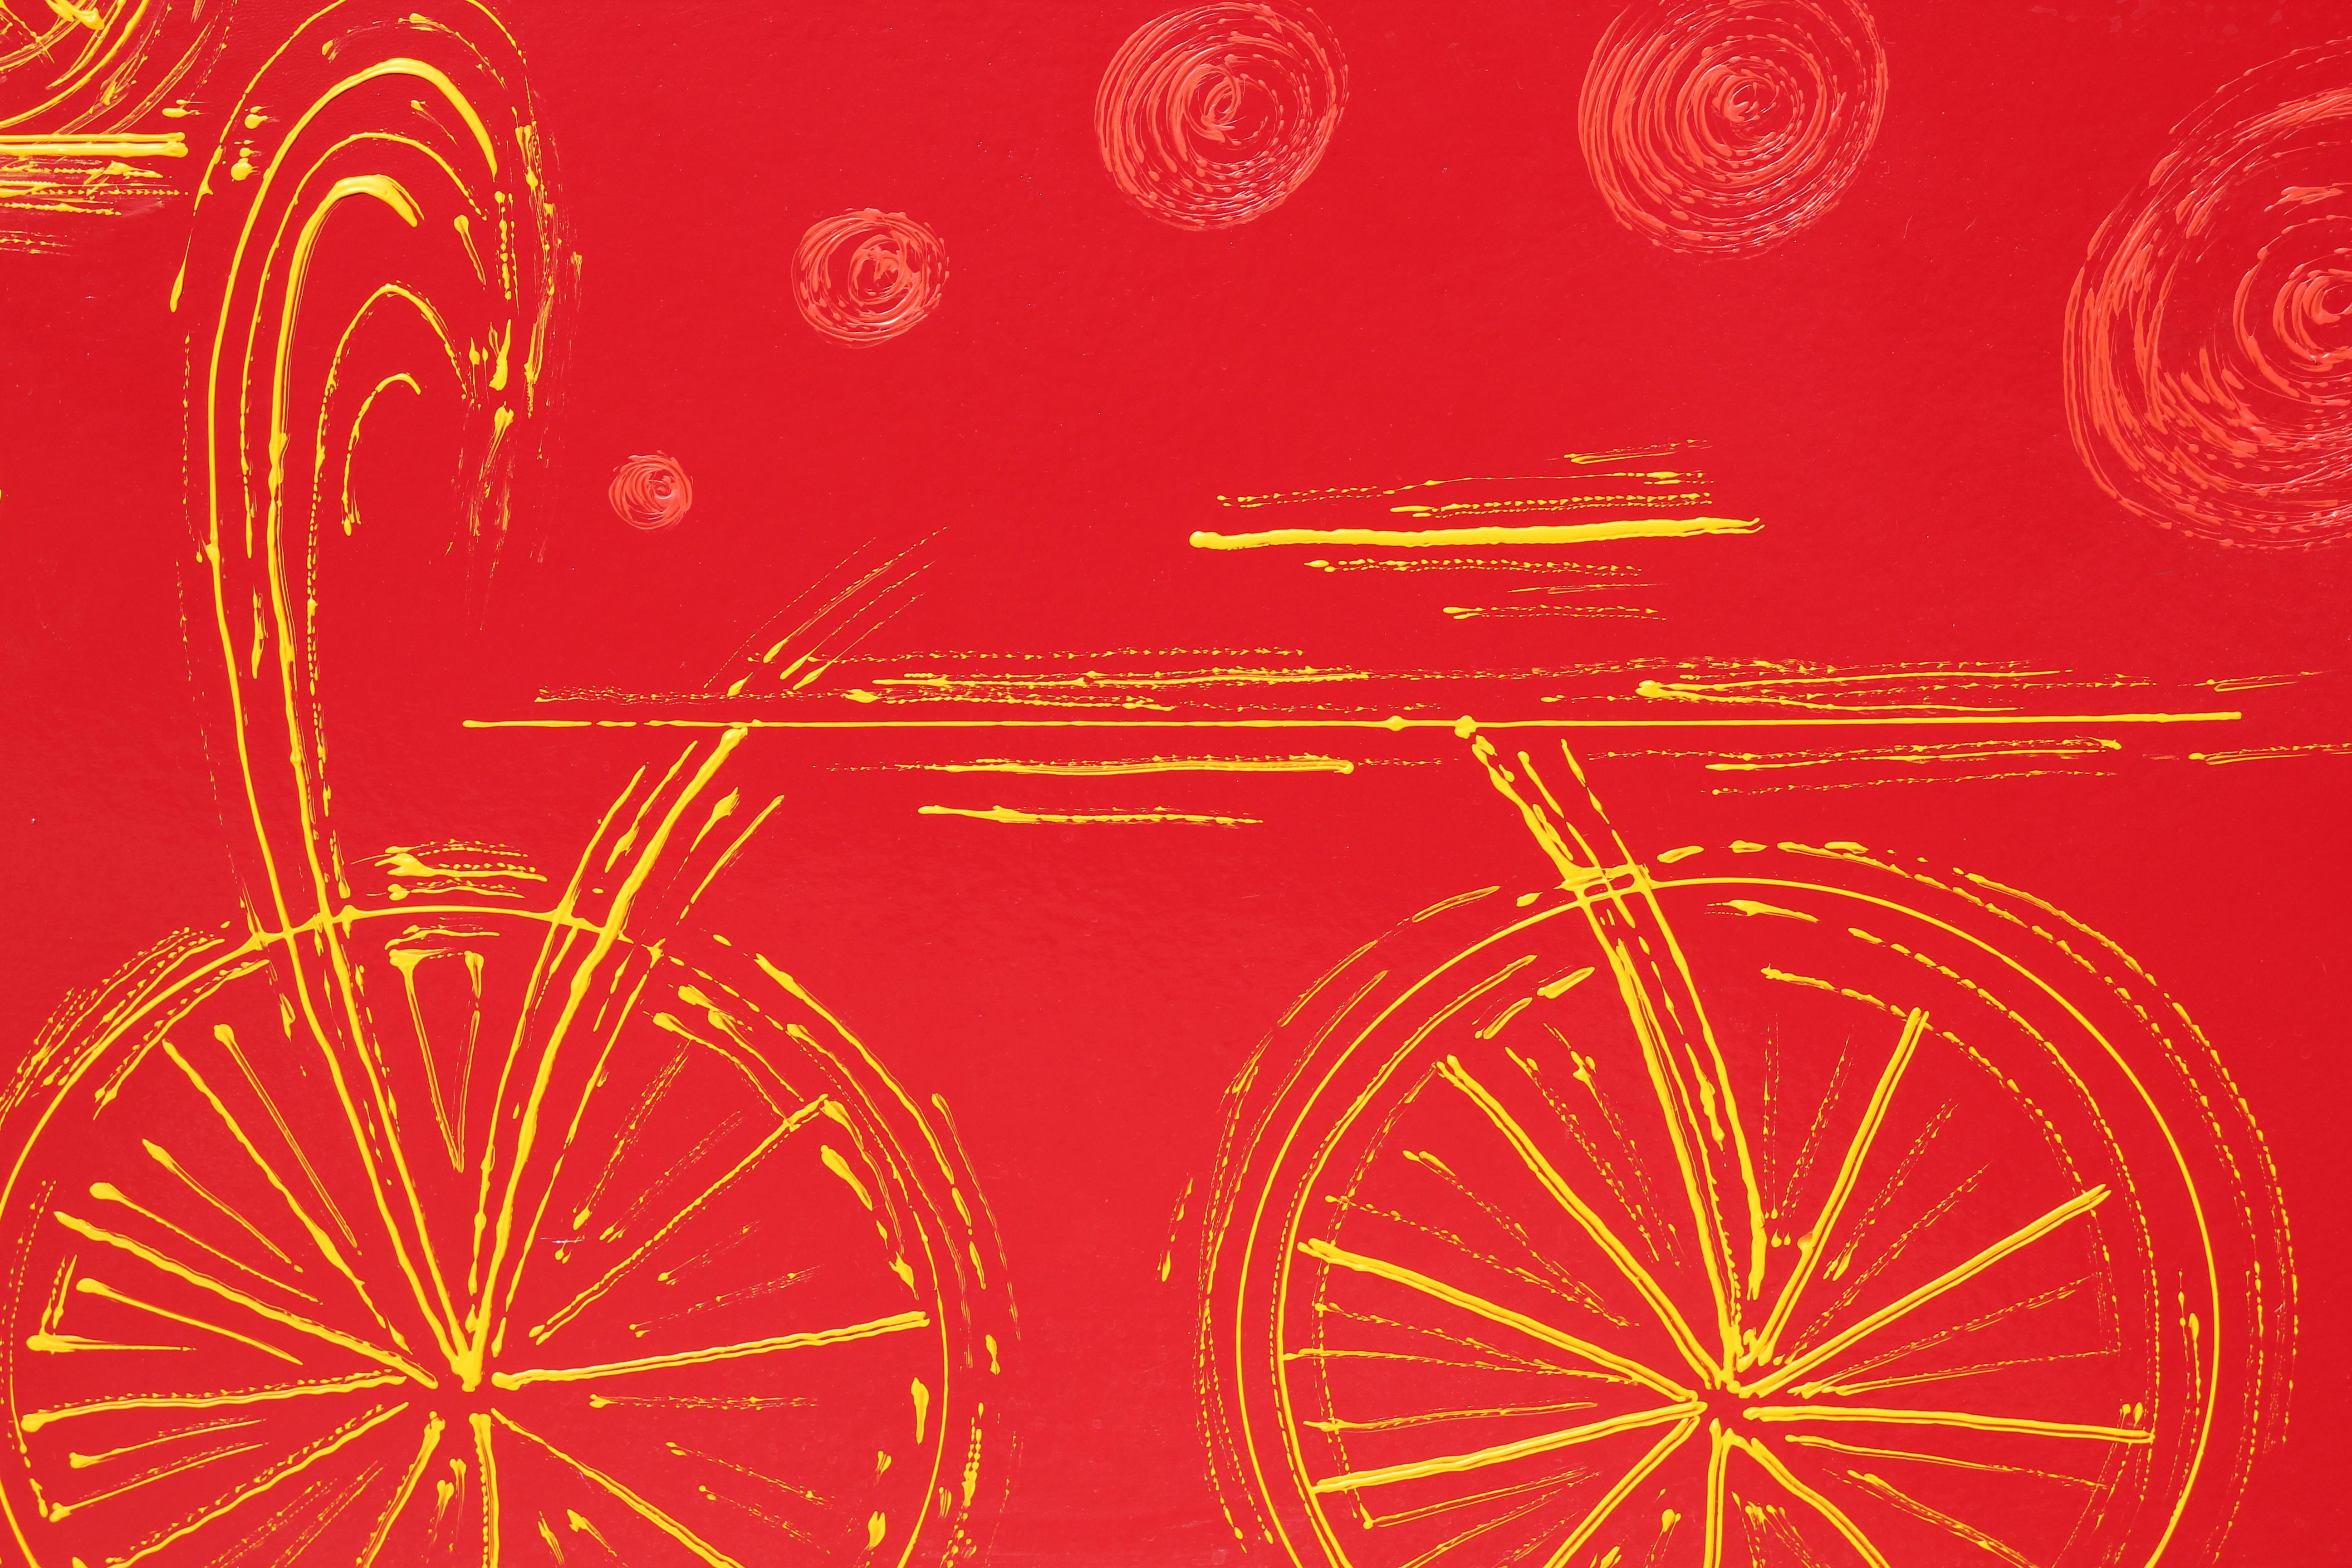 Red and yellow tonal minimal abstract painting with bicycles. The work is signed by the artist in the bottom corner. The canvas board is framed in a gold frame. 
Dimensions without Frame: H 31.5 in x W 47.5 in